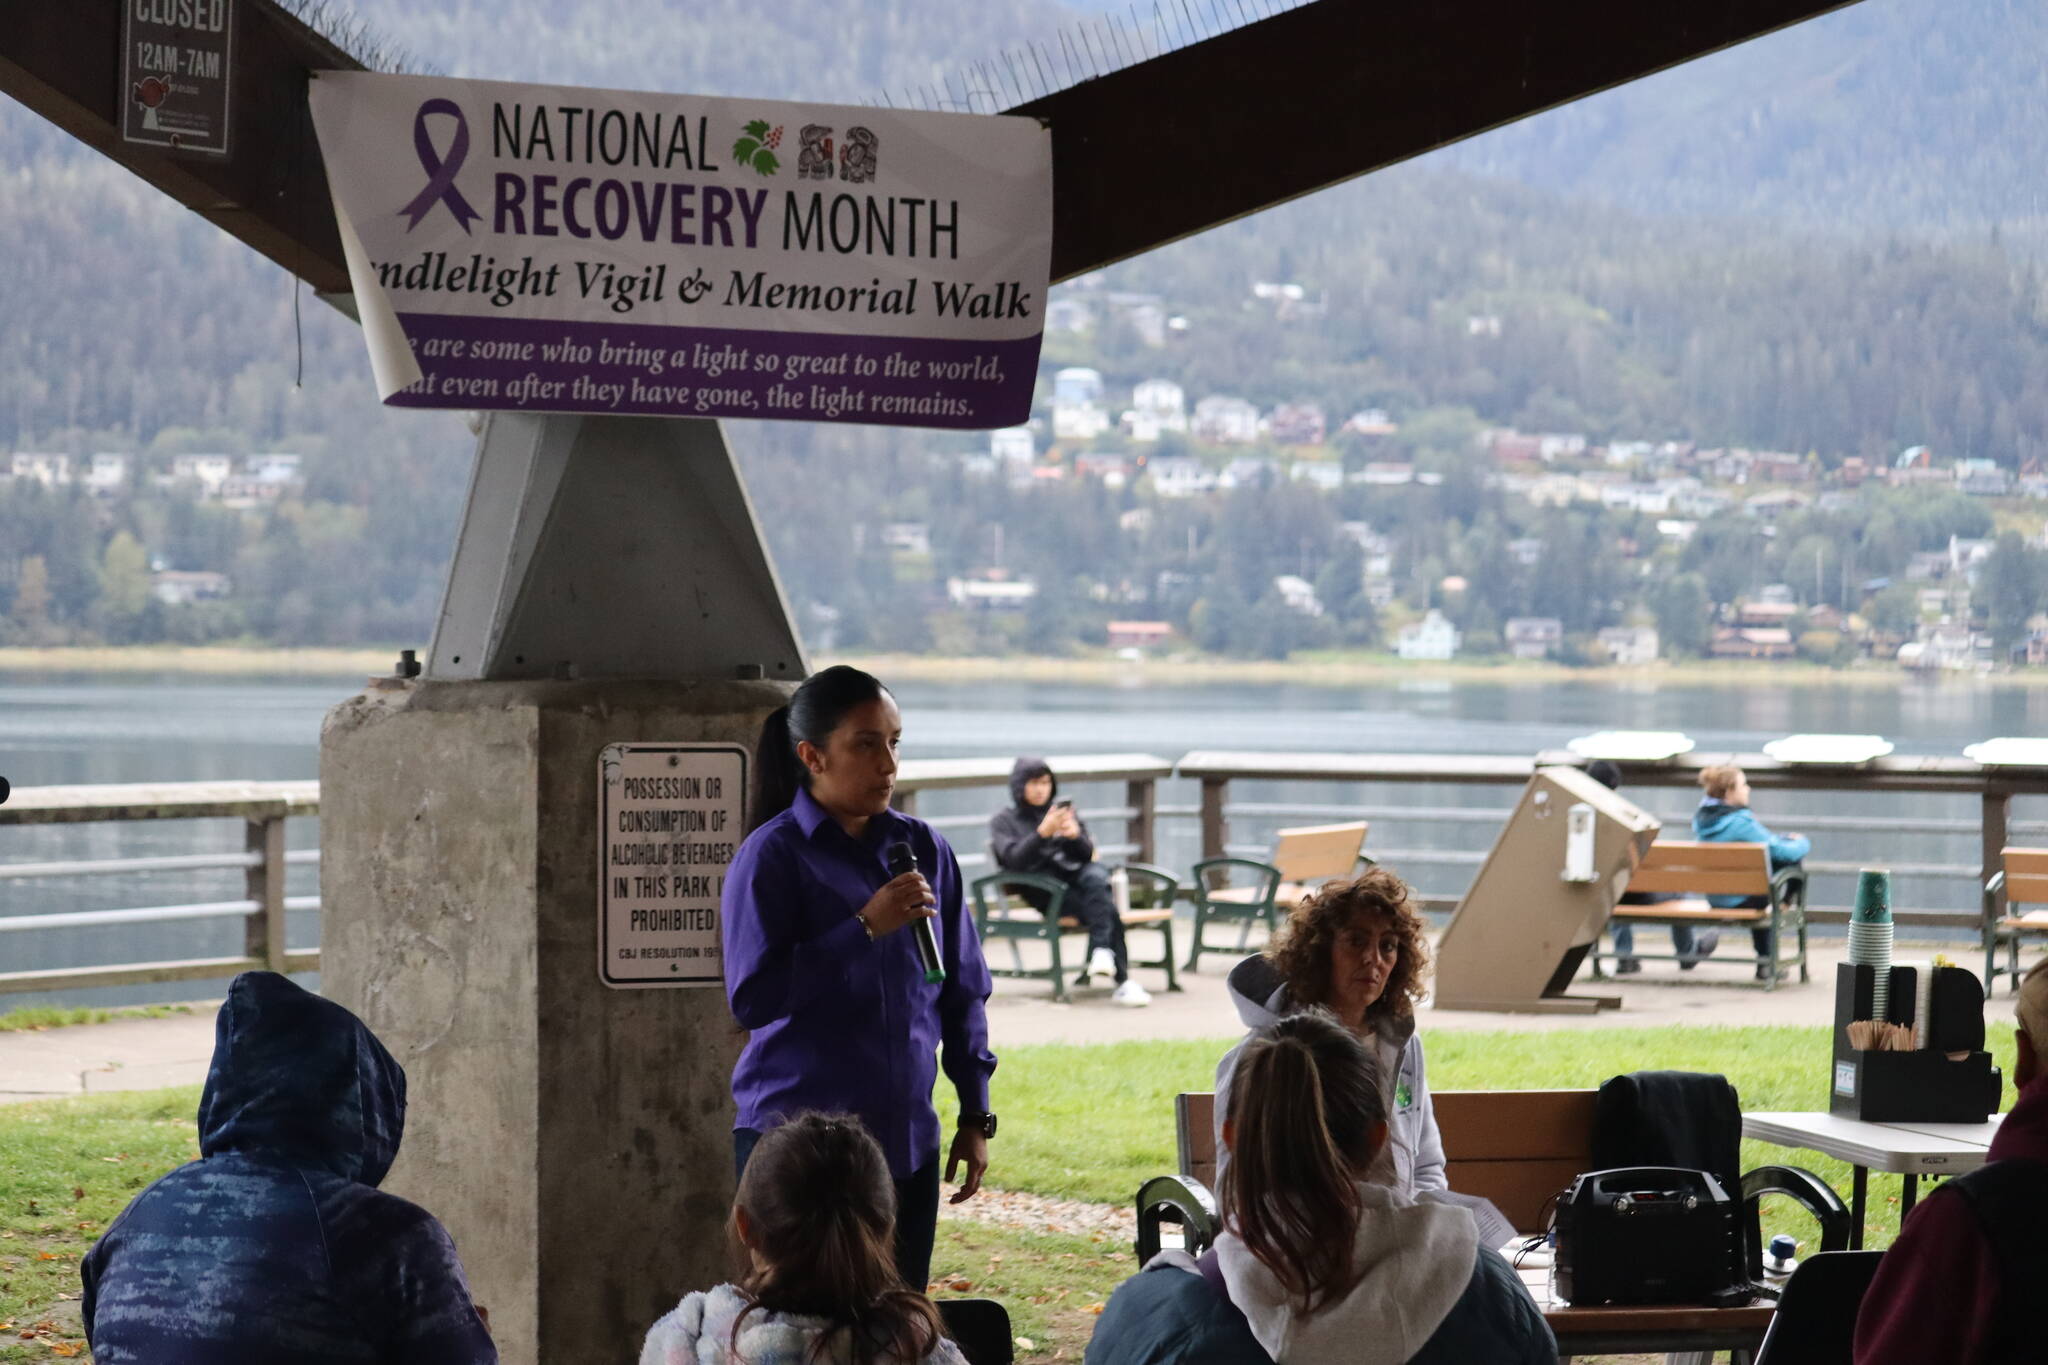 Tlingit and Haida’s recovery coordinator Jaclyn Bacani hosted Saturday night’s ceremony and introduced Amalia Monreal, also seen in this photo, who opened the vigil by leading the crowd in a prayer. (Jonson Kuhn / Juneau Empire)